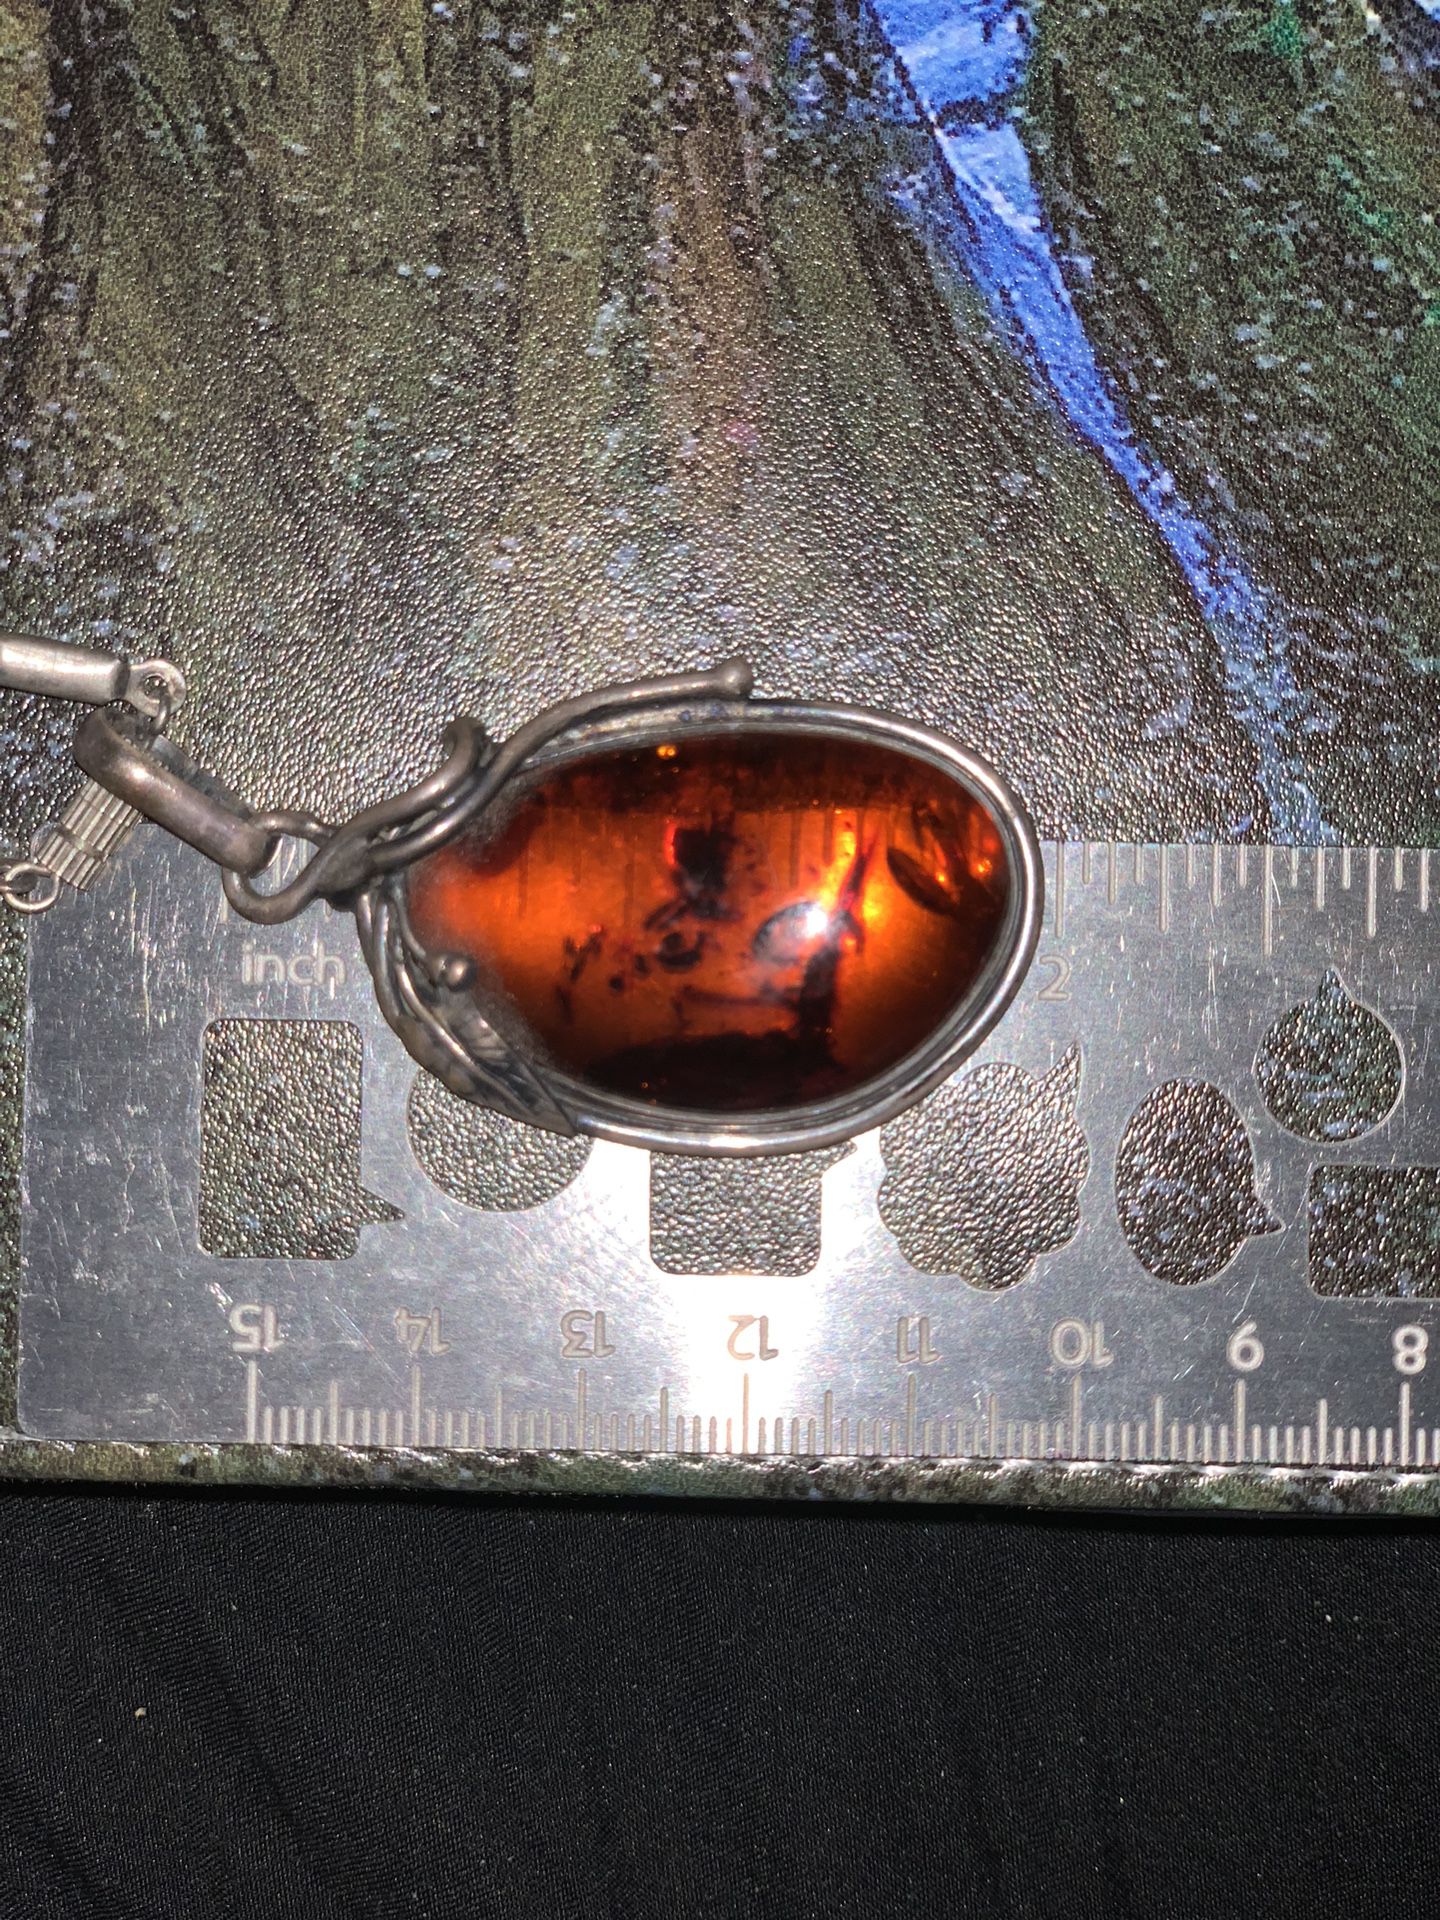 Amber Necklace 